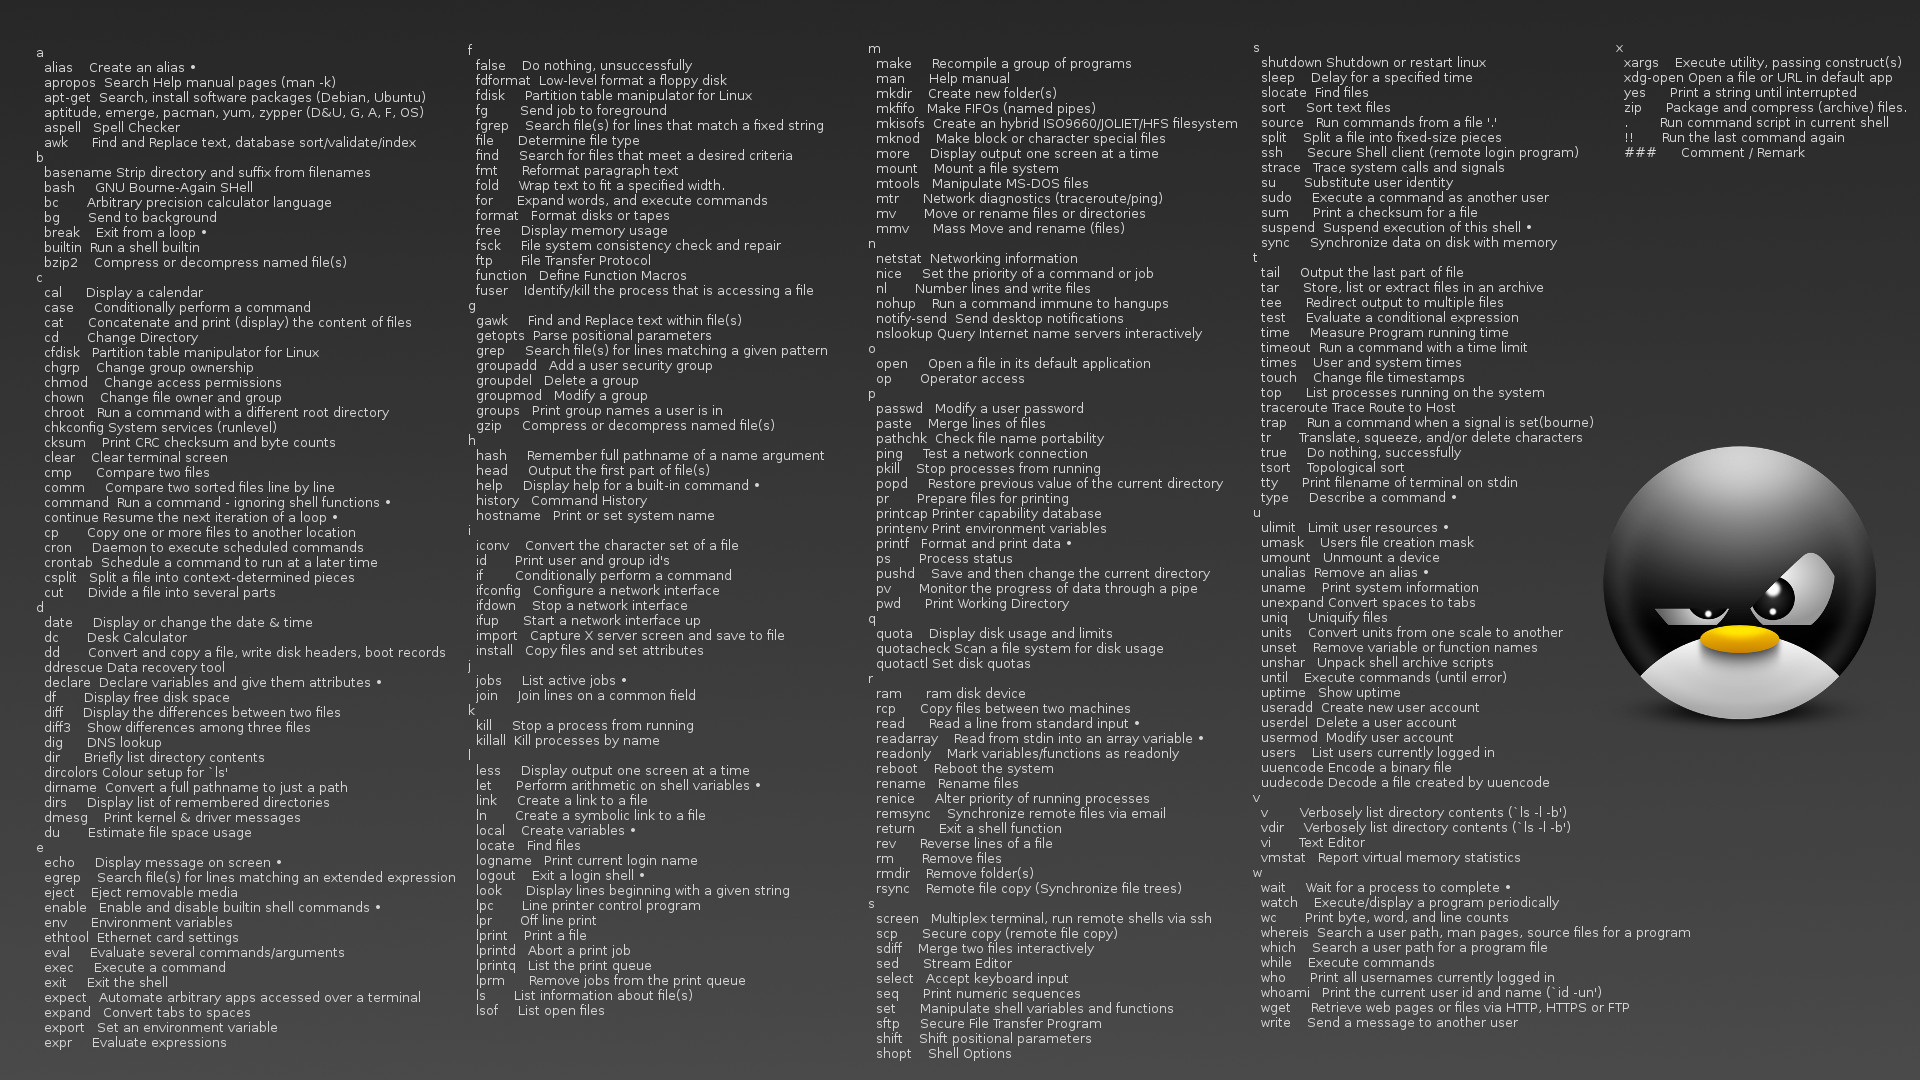 Heres a replacement for the Linux Command line wallpaper